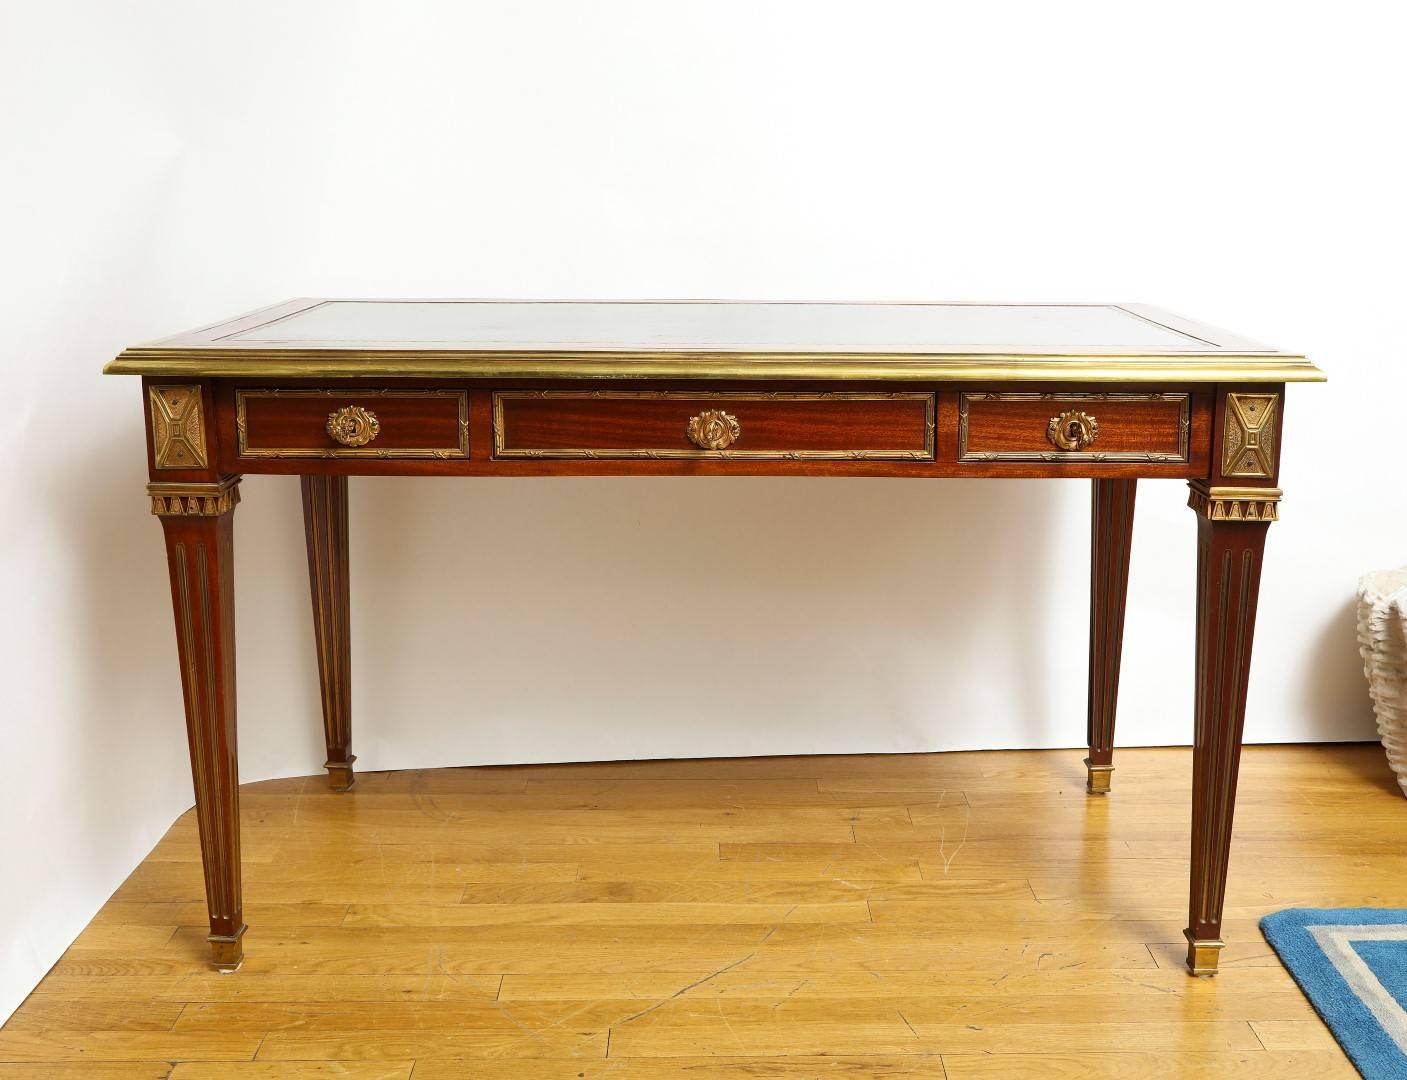 A French Louis VXI style mahogany writing table the square and tapered legs with bronze sabots and bronze mounts, the apron finished on four sides with two drawers on one side and false drawers on the opposing side. The top with bronze molded edge